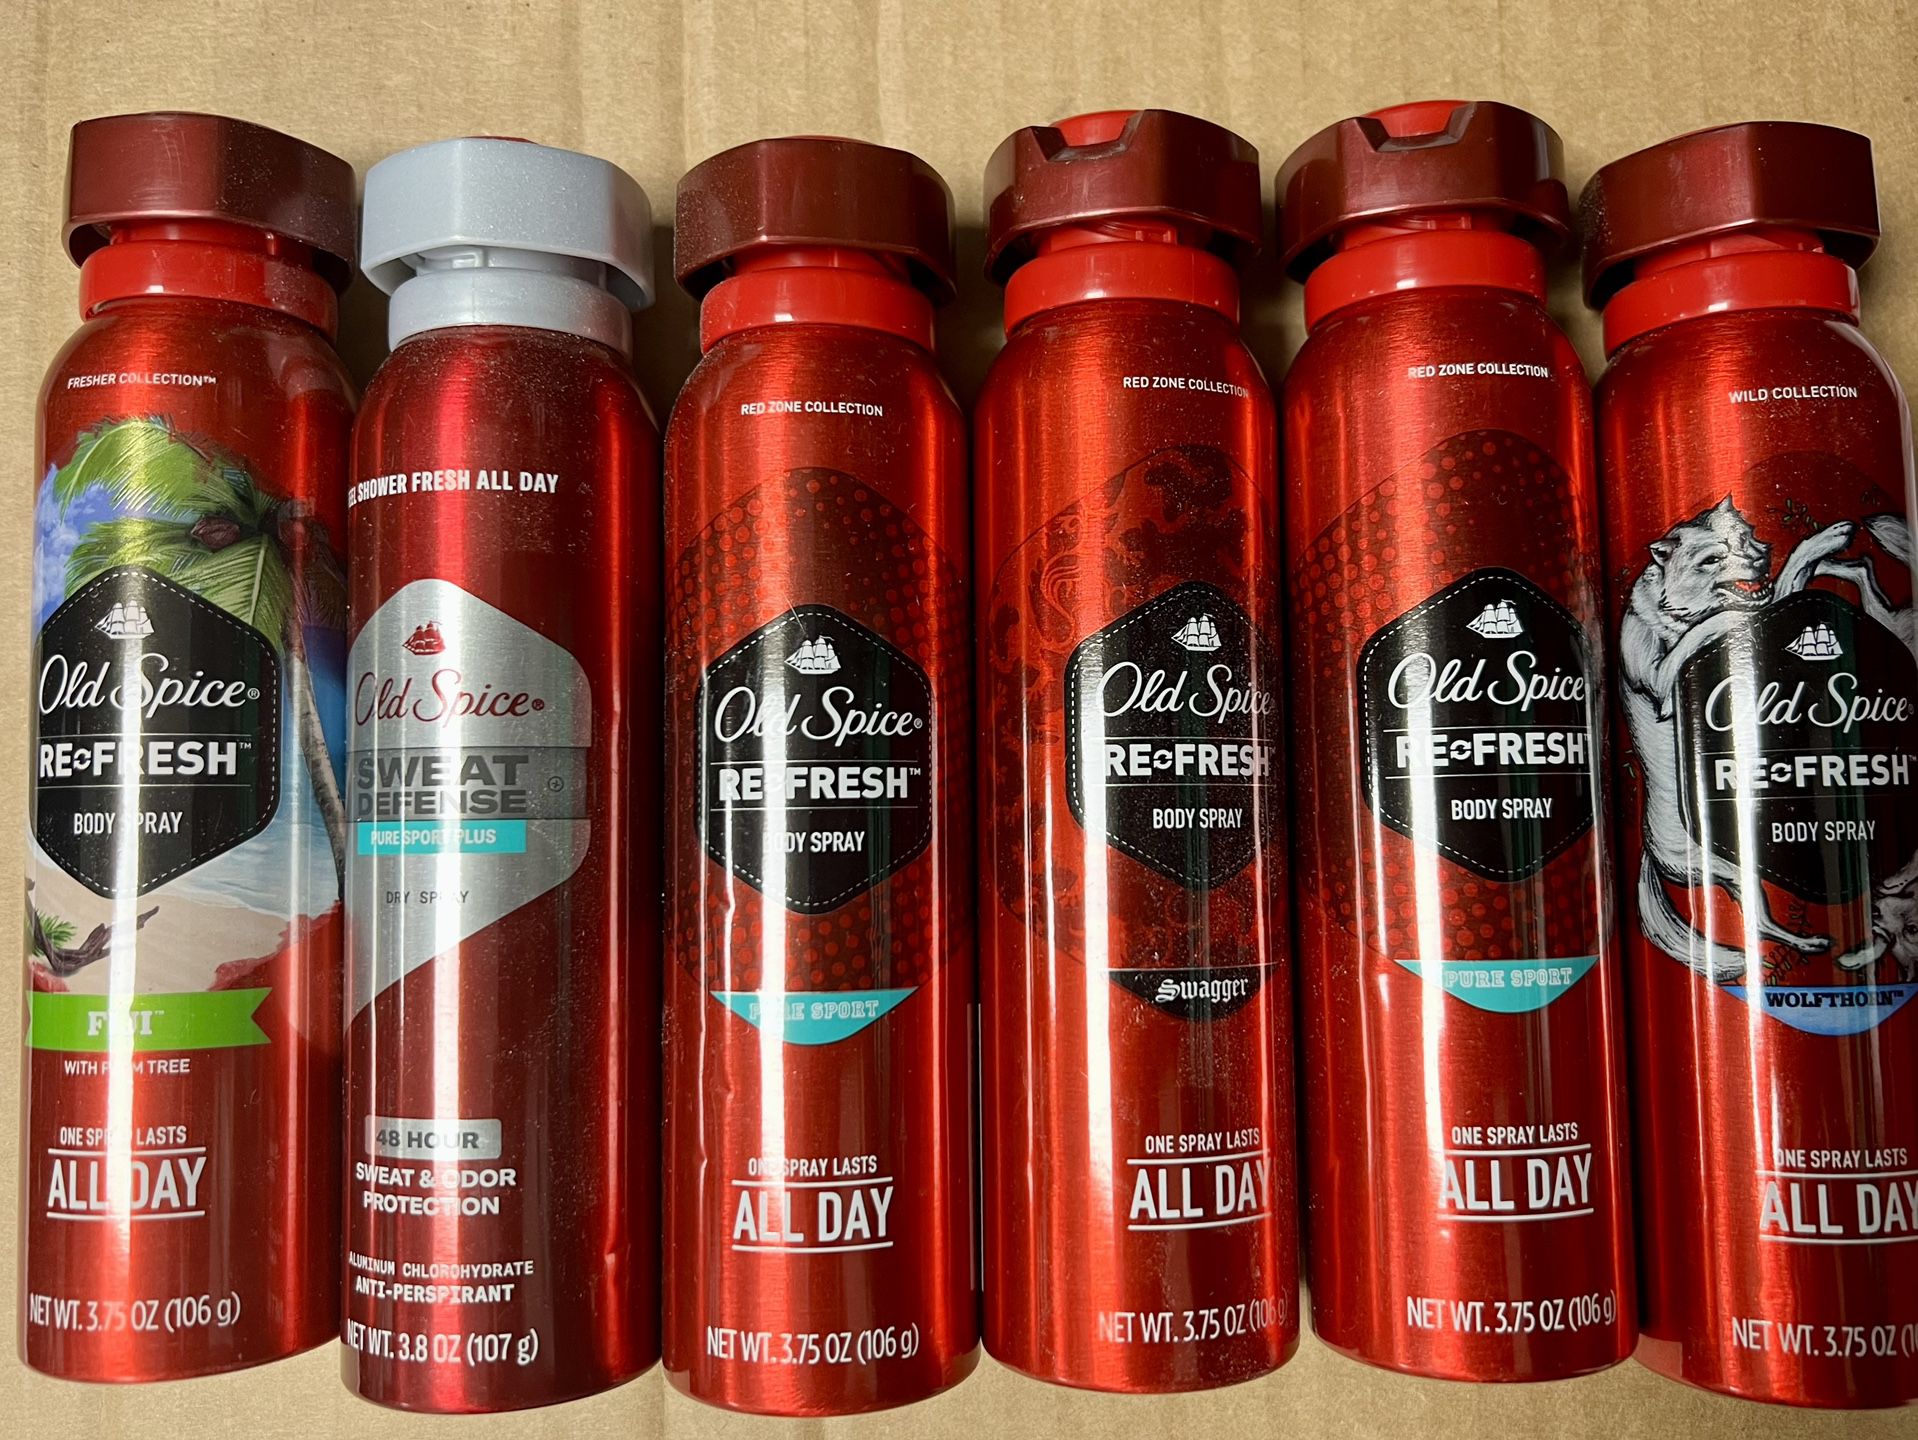 6 Old Spice All day, 48 hour sweat odor protection men body deodorant spray